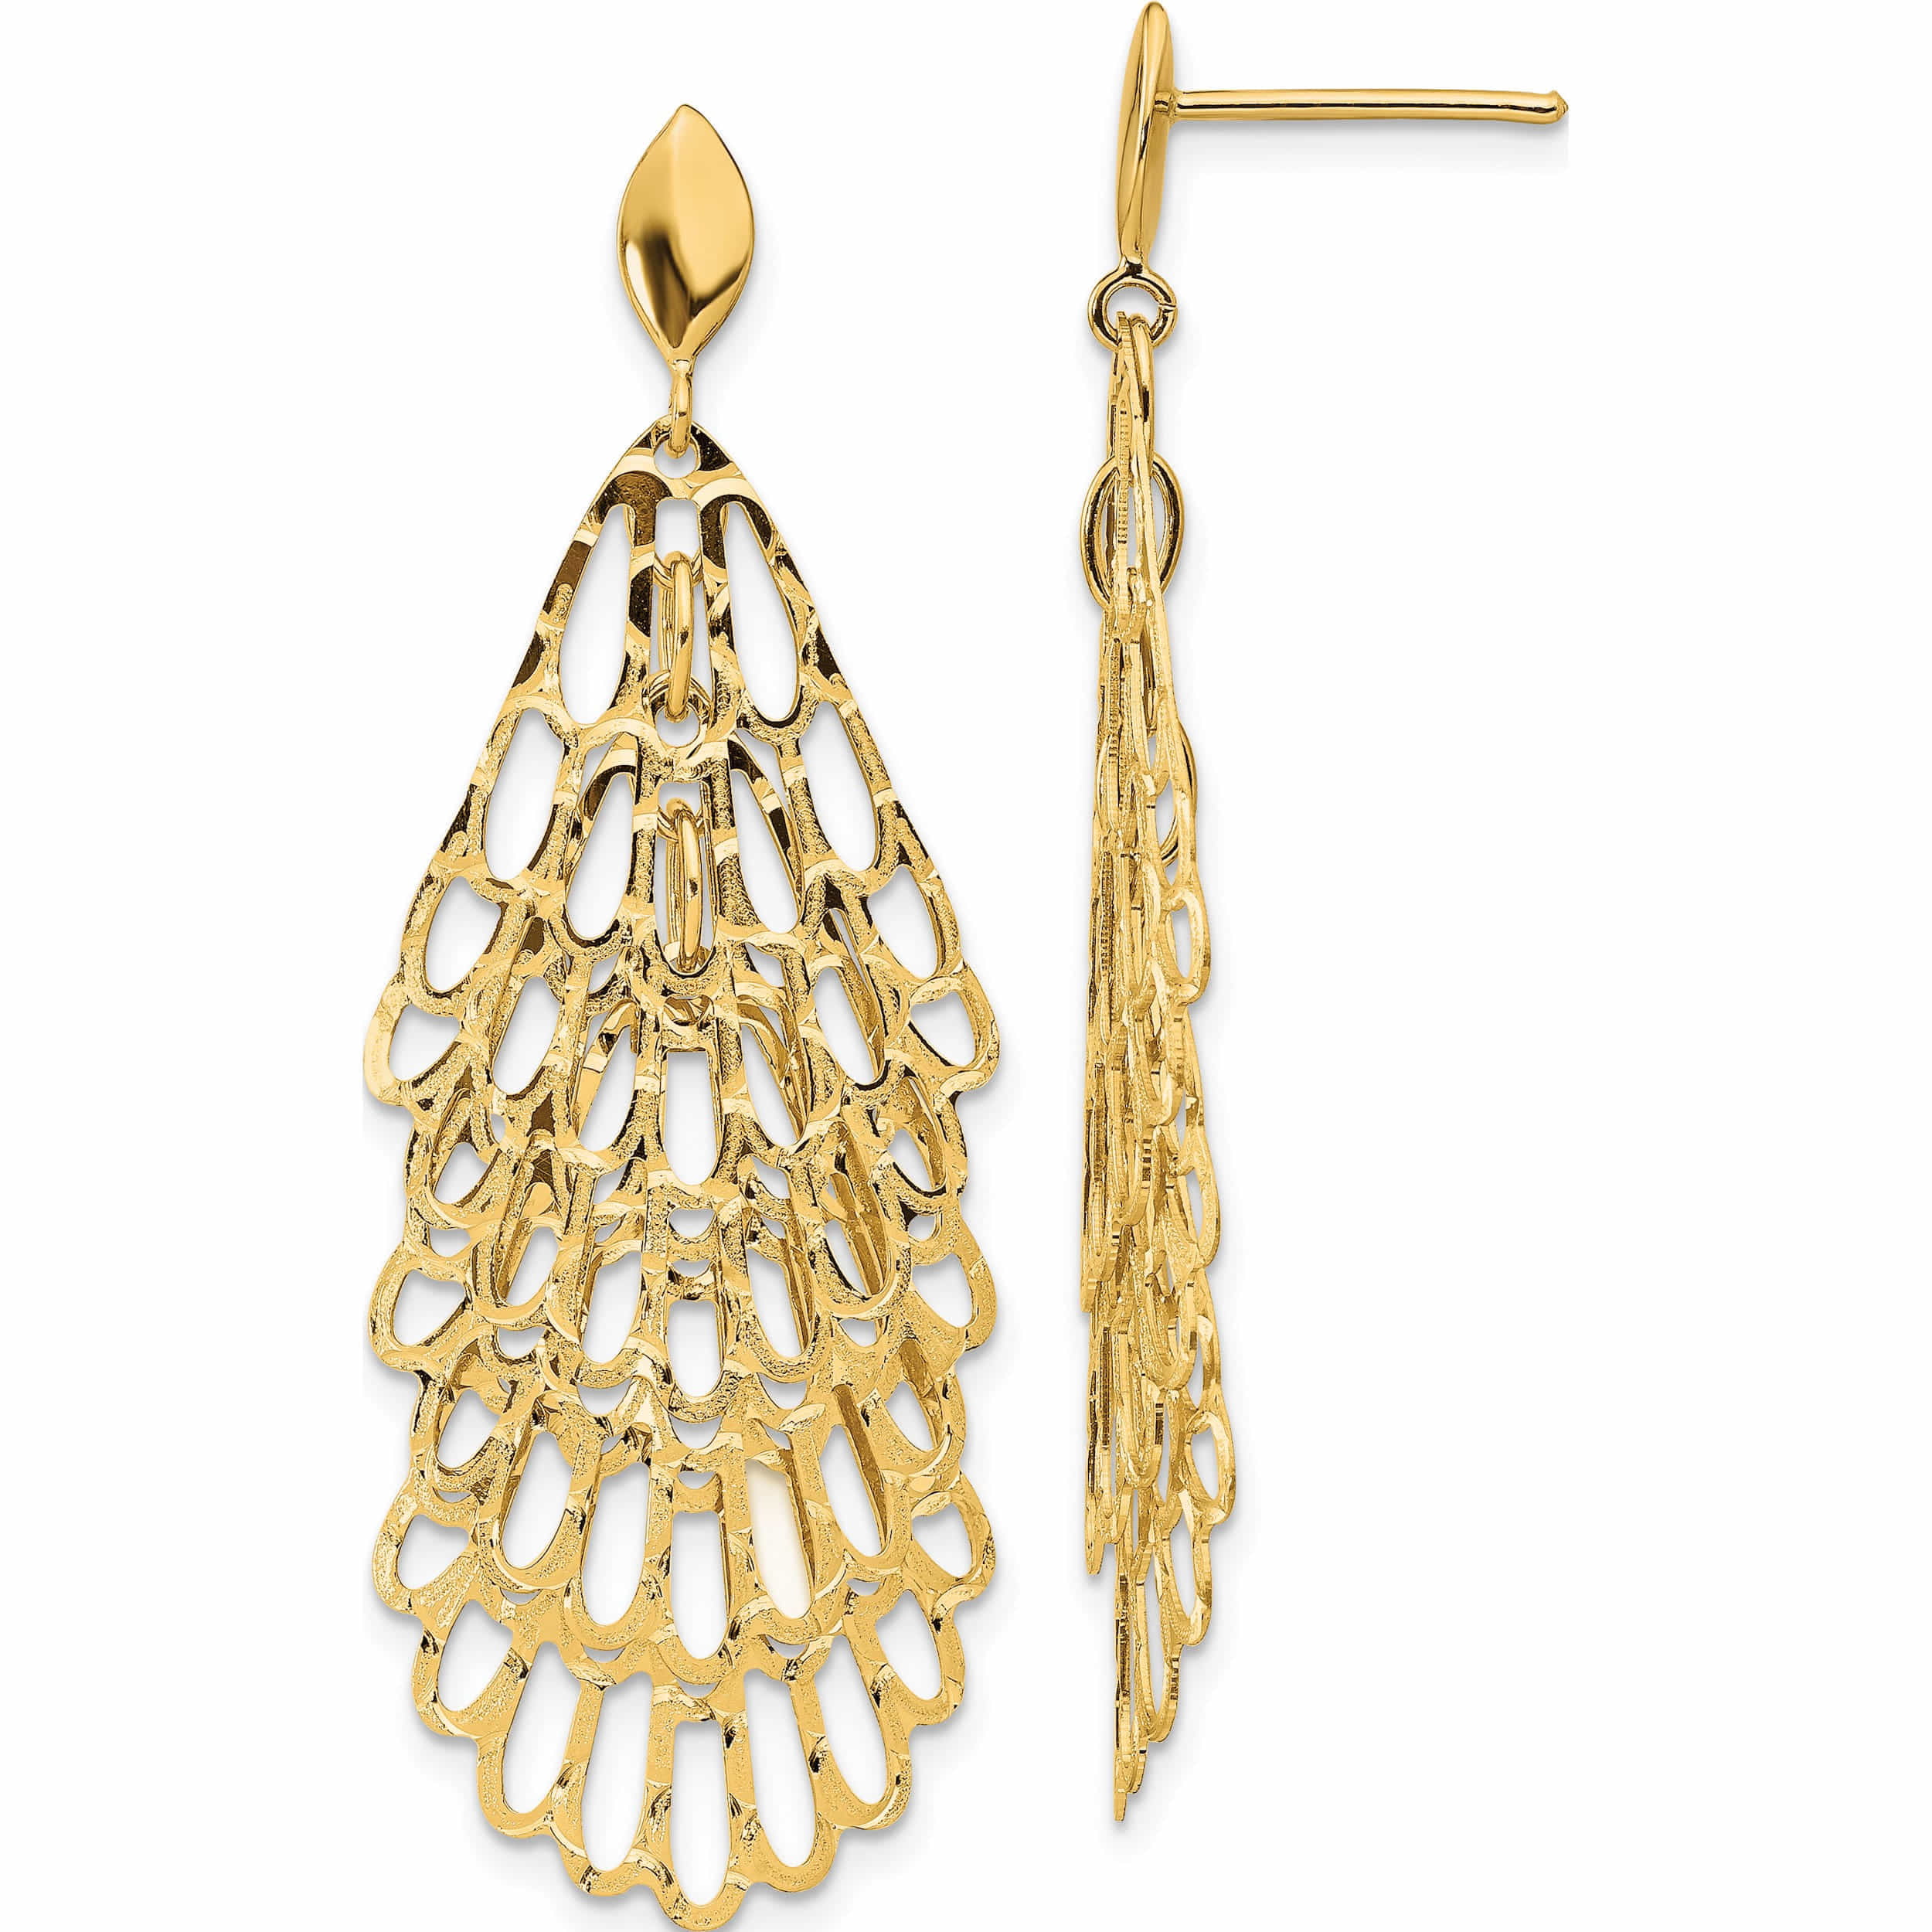 14k Yellow Gold Polished Textured Post Dangle Earrings 